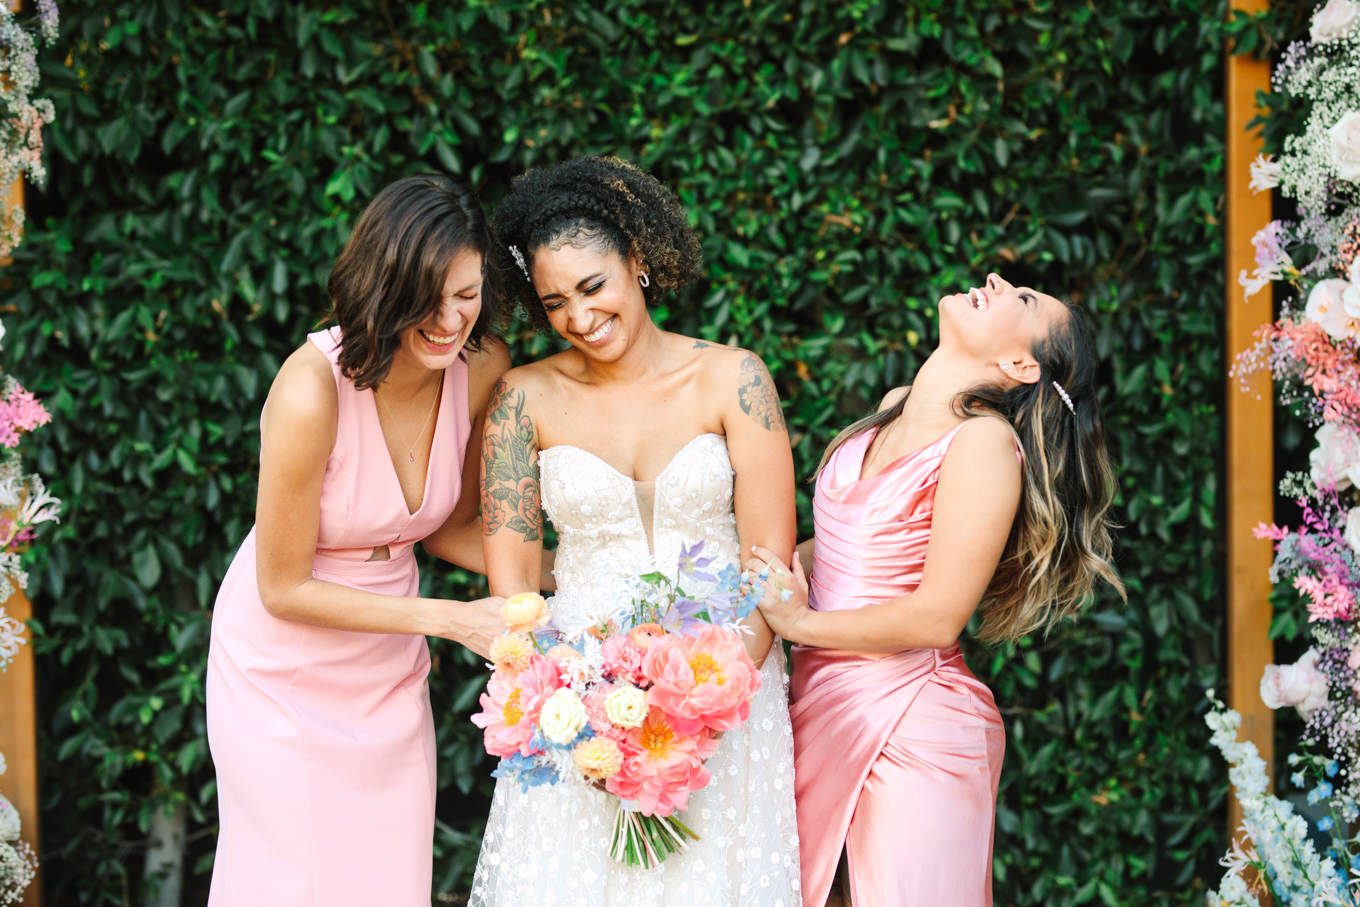 Bridesmaids laughing with bride | Colorful pop-up micro wedding at The Ruby Street Los Angeles featured on Green Wedding Shoes | Colorful and elevated photography for fun-loving couples in Southern California | #colorfulwedding #popupwedding #weddingphotography #microwedding Source: Mary Costa Photography | Los Angeles